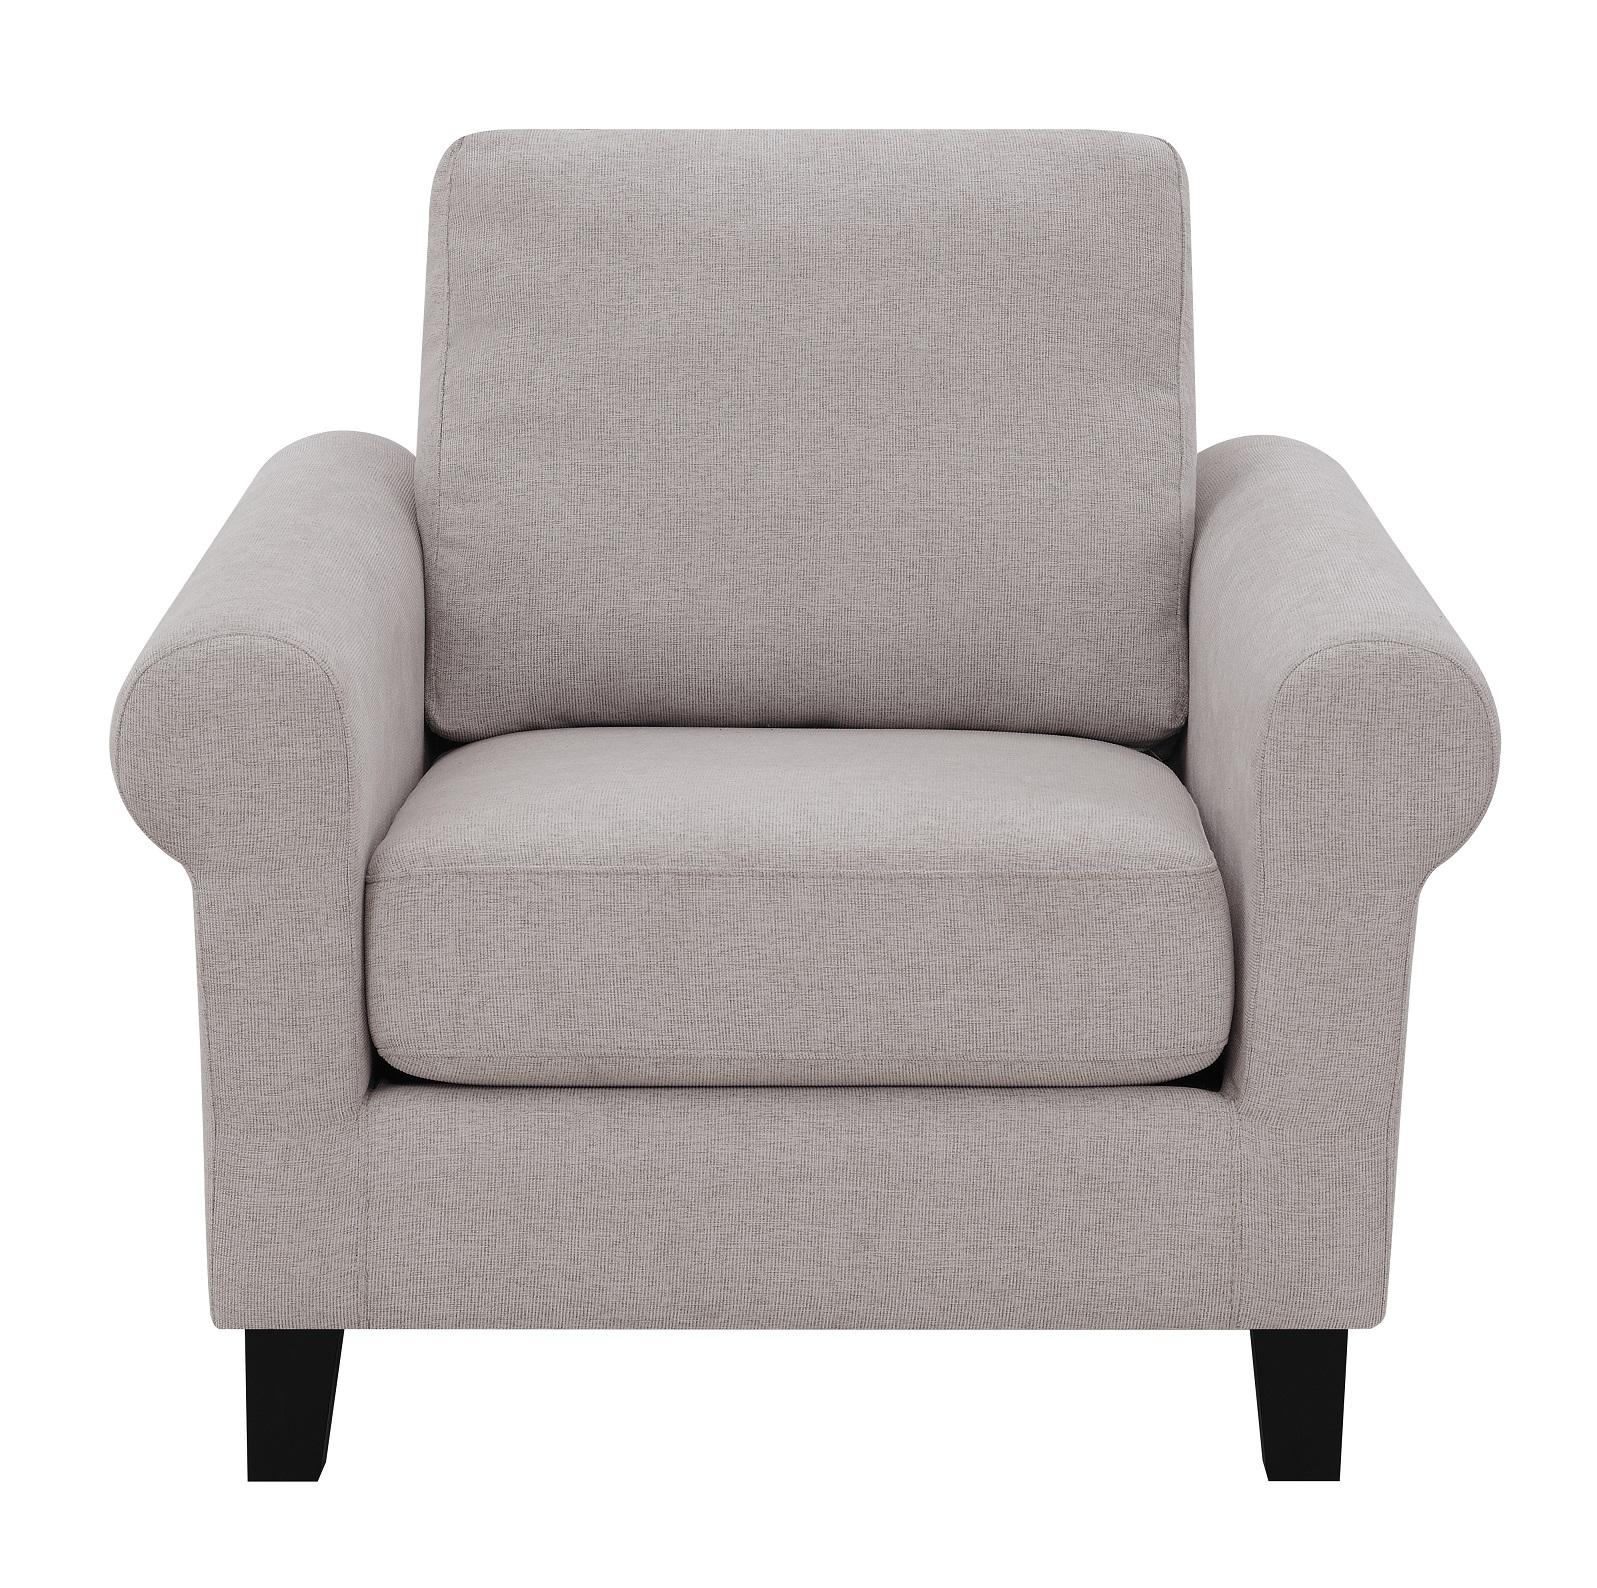 Transitional Arm Chair 509783 Nadine 509783 in Oatmeal Chenille